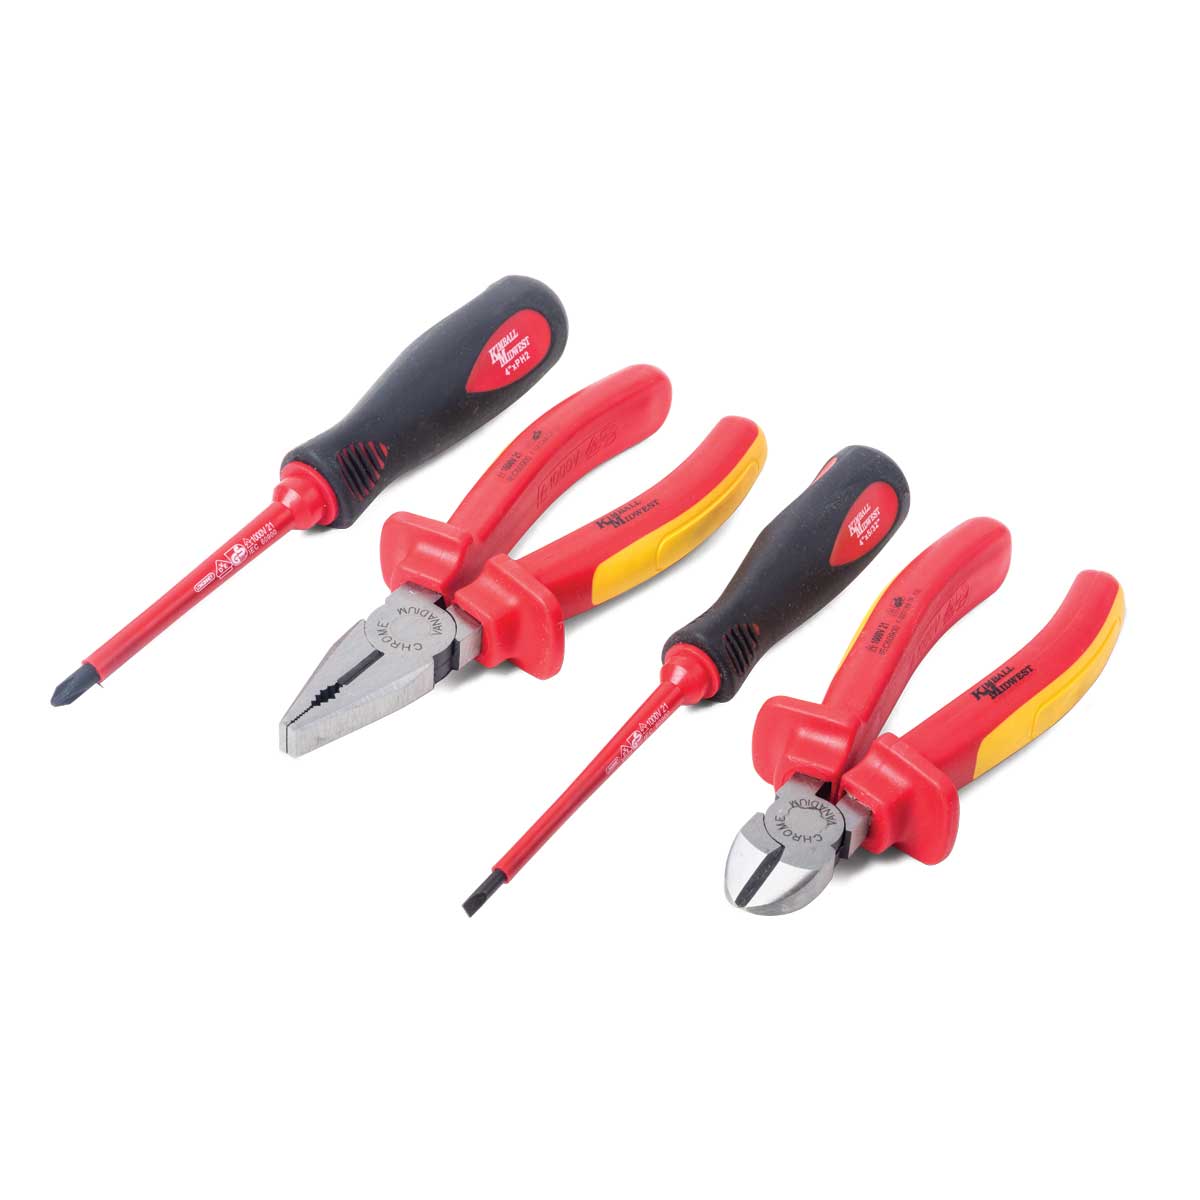 4 Piece Insulated Tool Kit